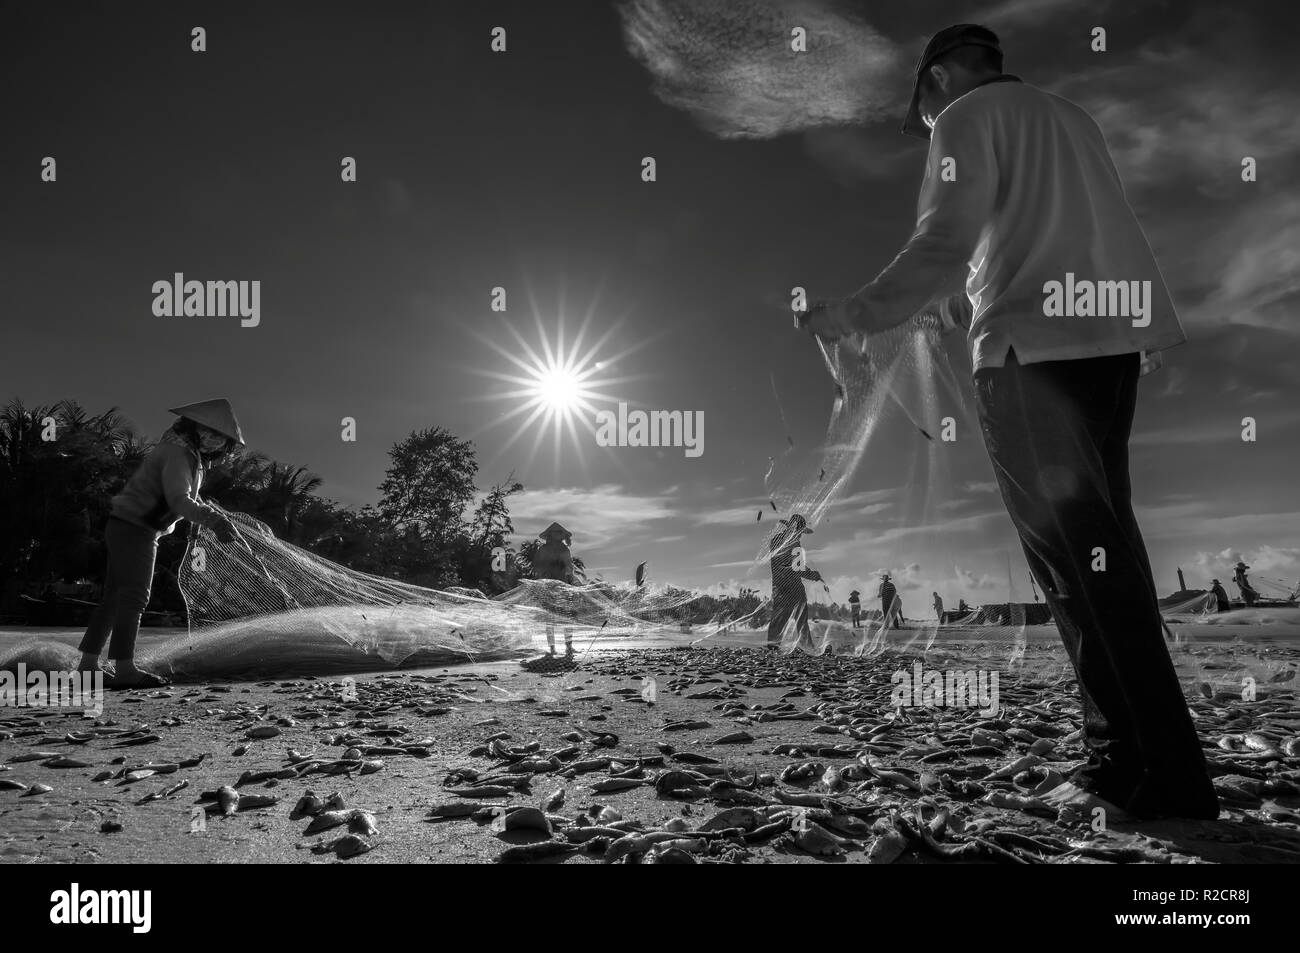 https://c8.alamy.com/comp/R2CR8J/fishermen-are-doing-fishing-net-after-catching-as-a-way-of-living-in-the-coastal-fishing-village-this-is-hard-work-but-many-families-in-phan-thiet-R2CR8J.jpg